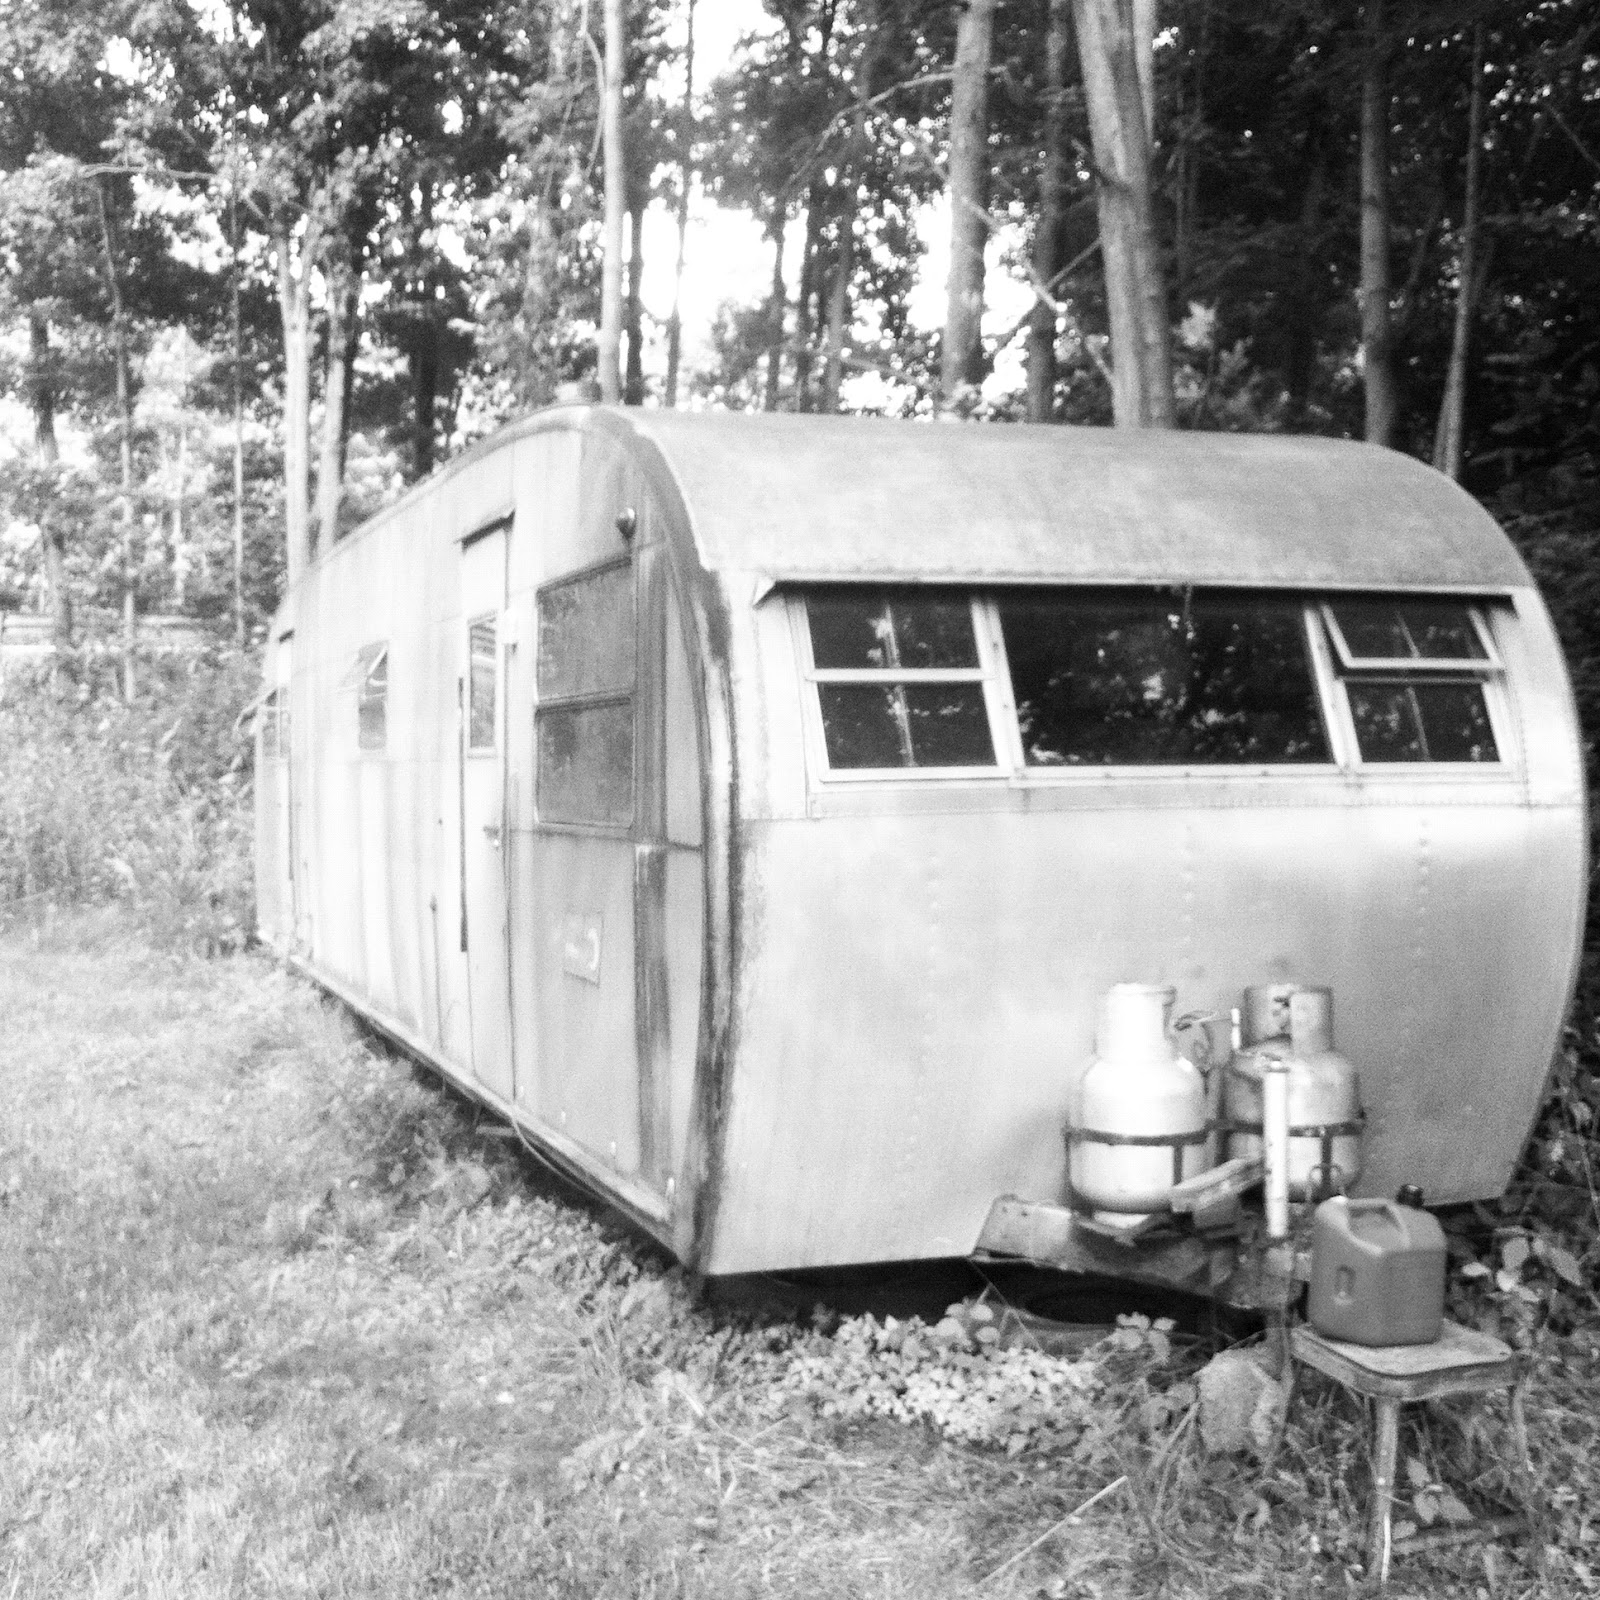 Tincan Trading Post: Royal Spartanette Travel Trailer - For Sale